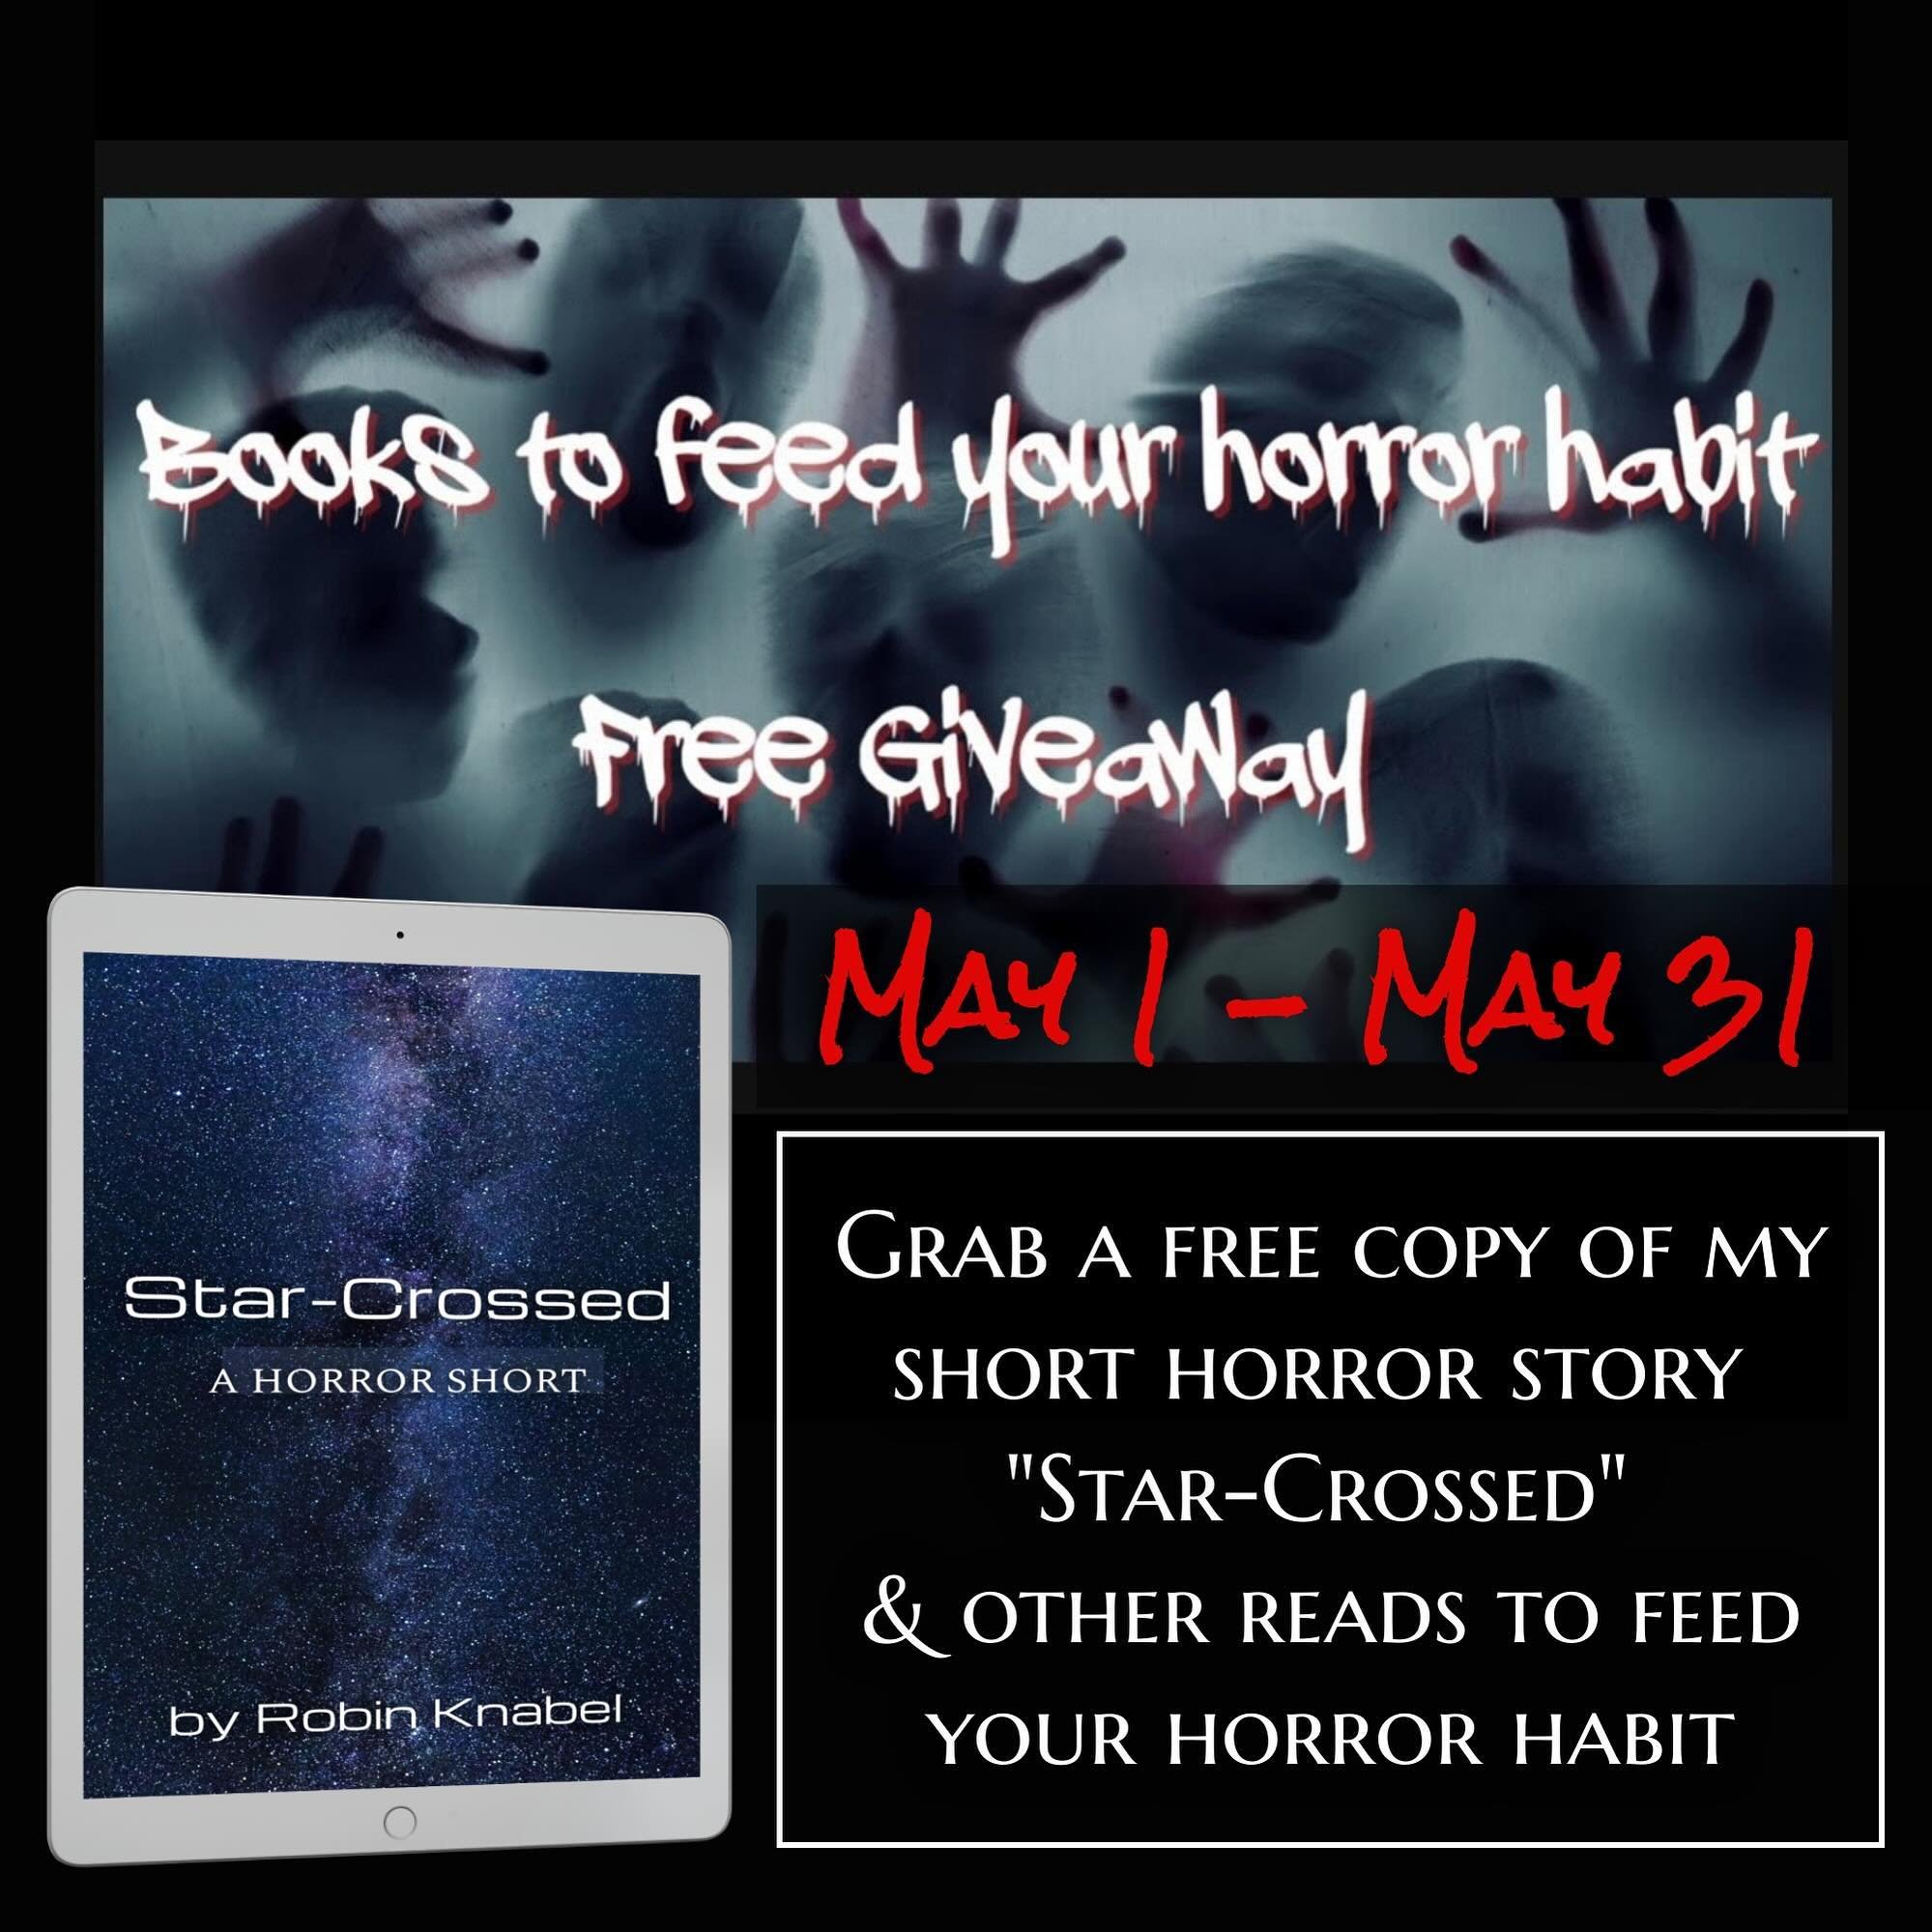 https://books.bookfunnel.com/horrorhabit/tk985no12e

📚😱 Grab some #freebie #books in this promo - featuring works from @mrevilkev @josephjdowling as well as my #horror short &ldquo;Star-Crossed&rdquo; ✨🧑&zwj;🚀📚😱 

#read #book #reading #whatarey